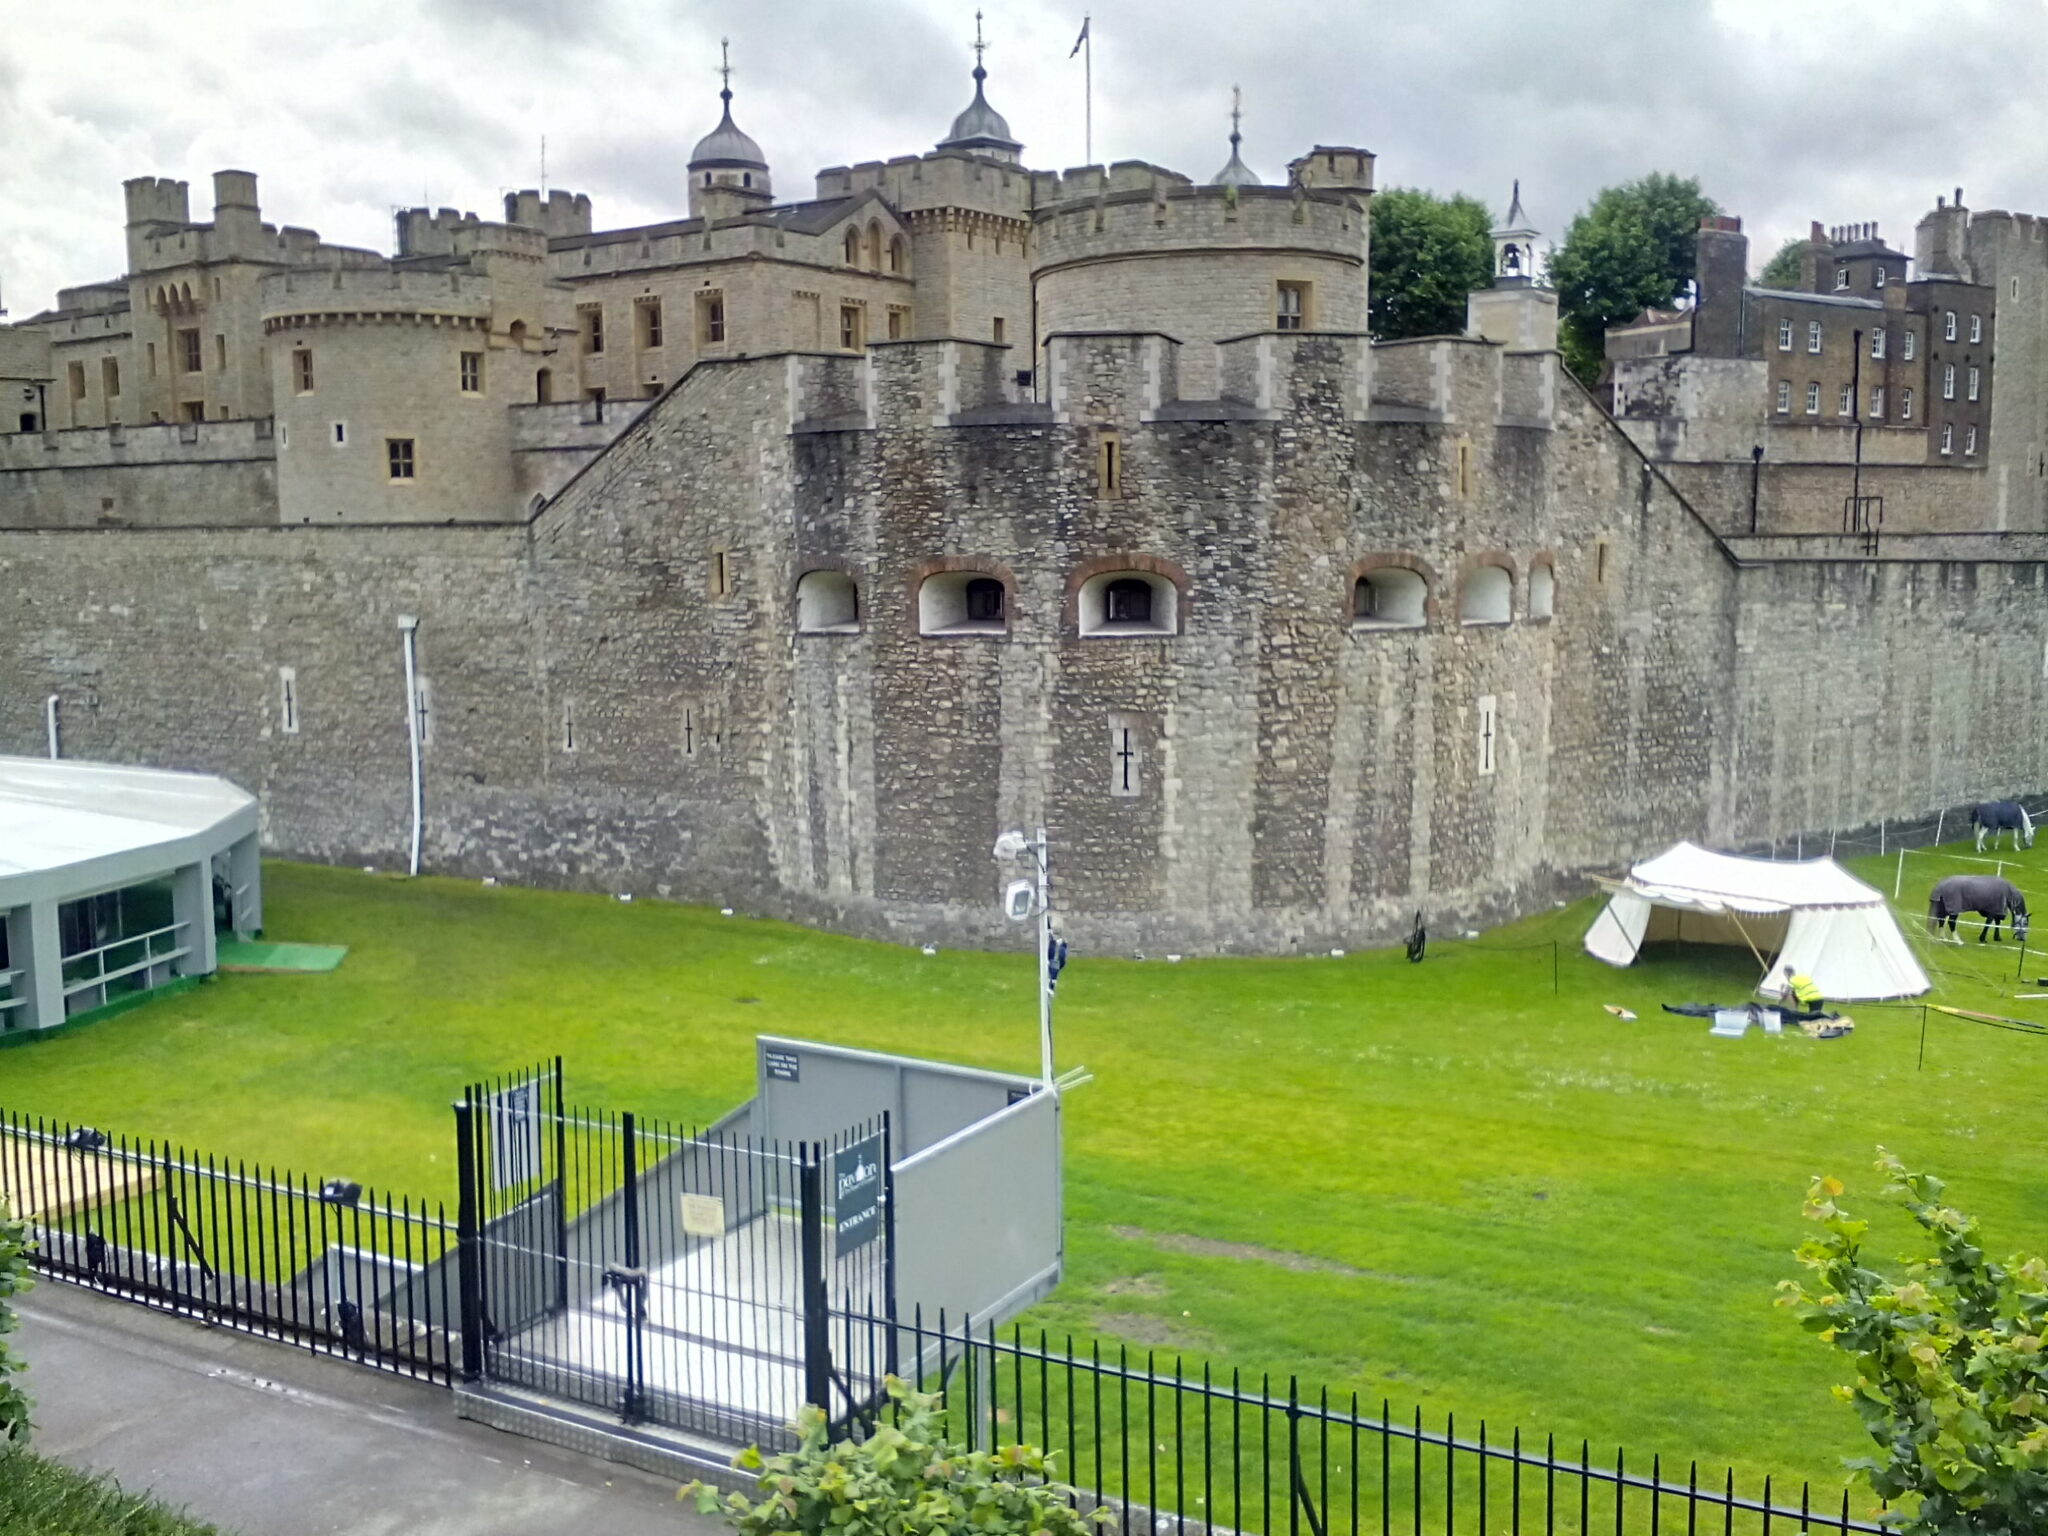 An iconic view of the historic Tower of London, surrounded by a moat, with its medieval architecture and dramatic presence.